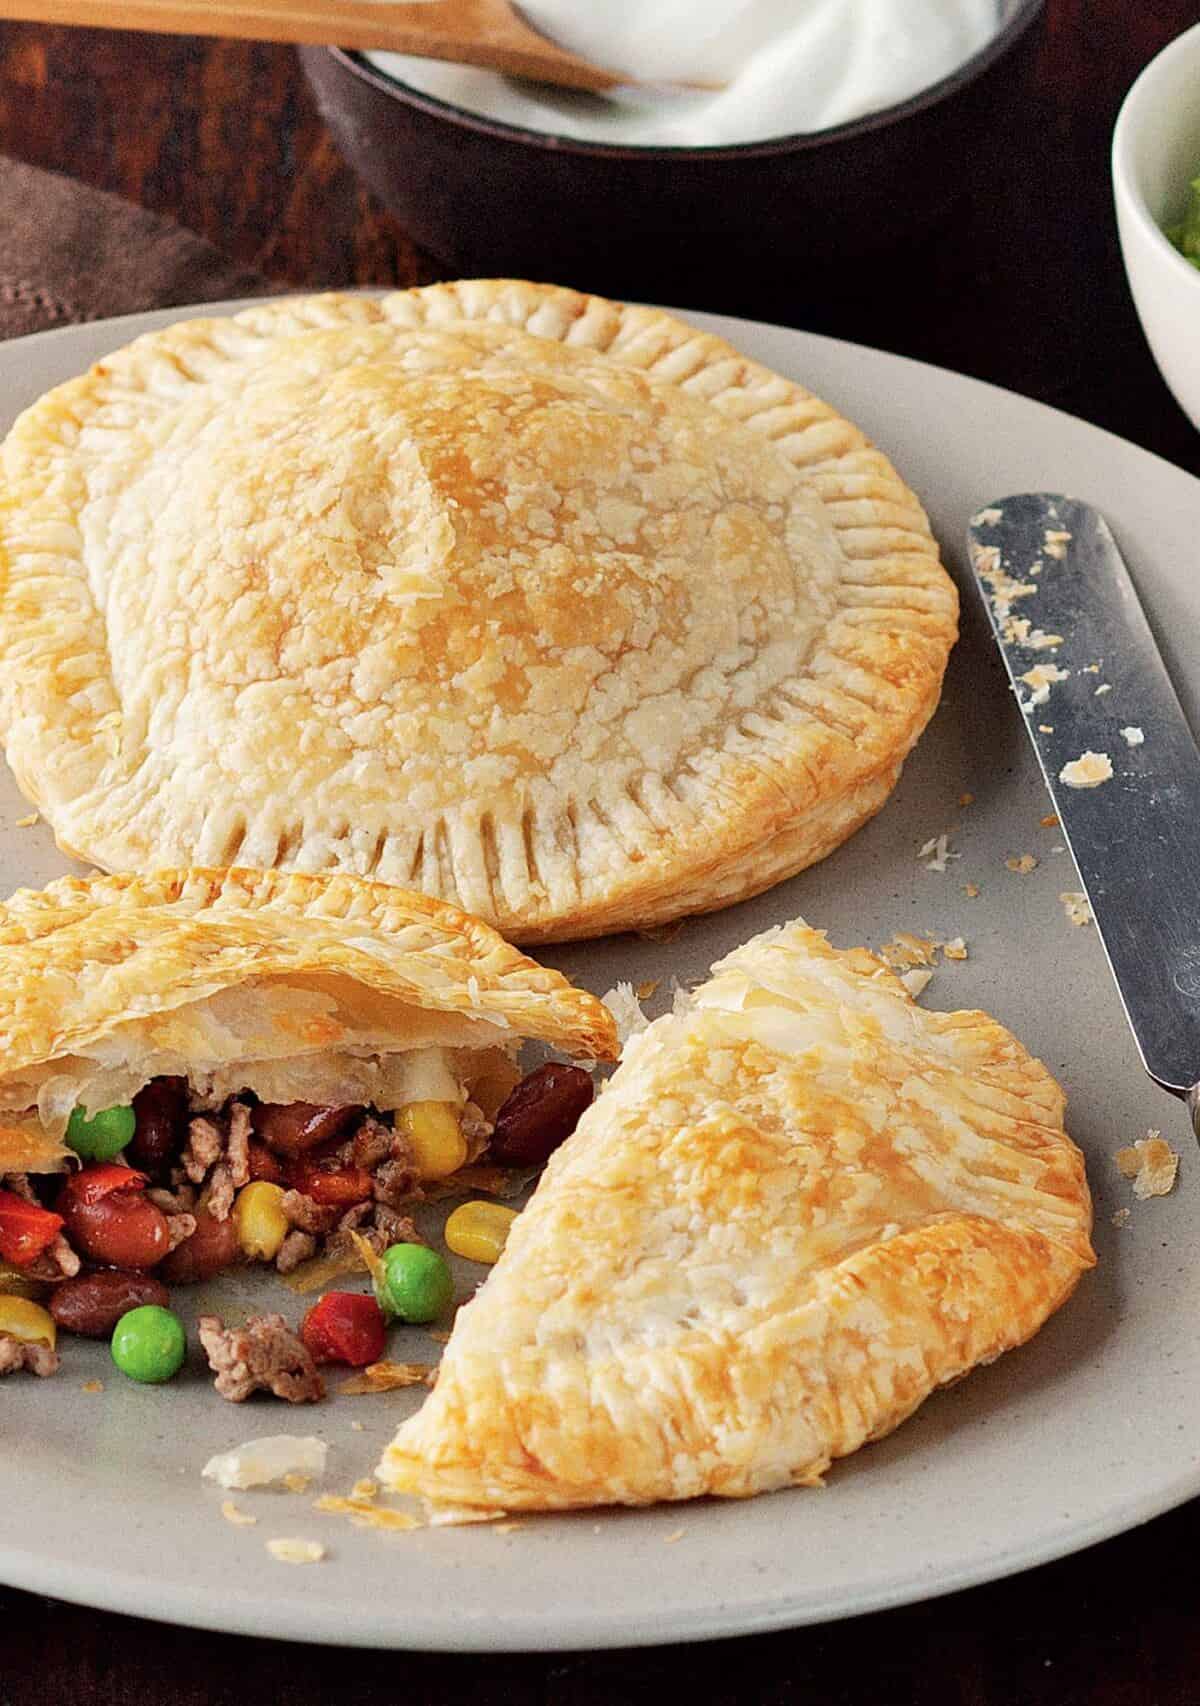  Layers of beef, cheese, and tortillas make this pie a perfect combination of Tex-Mex goodness.